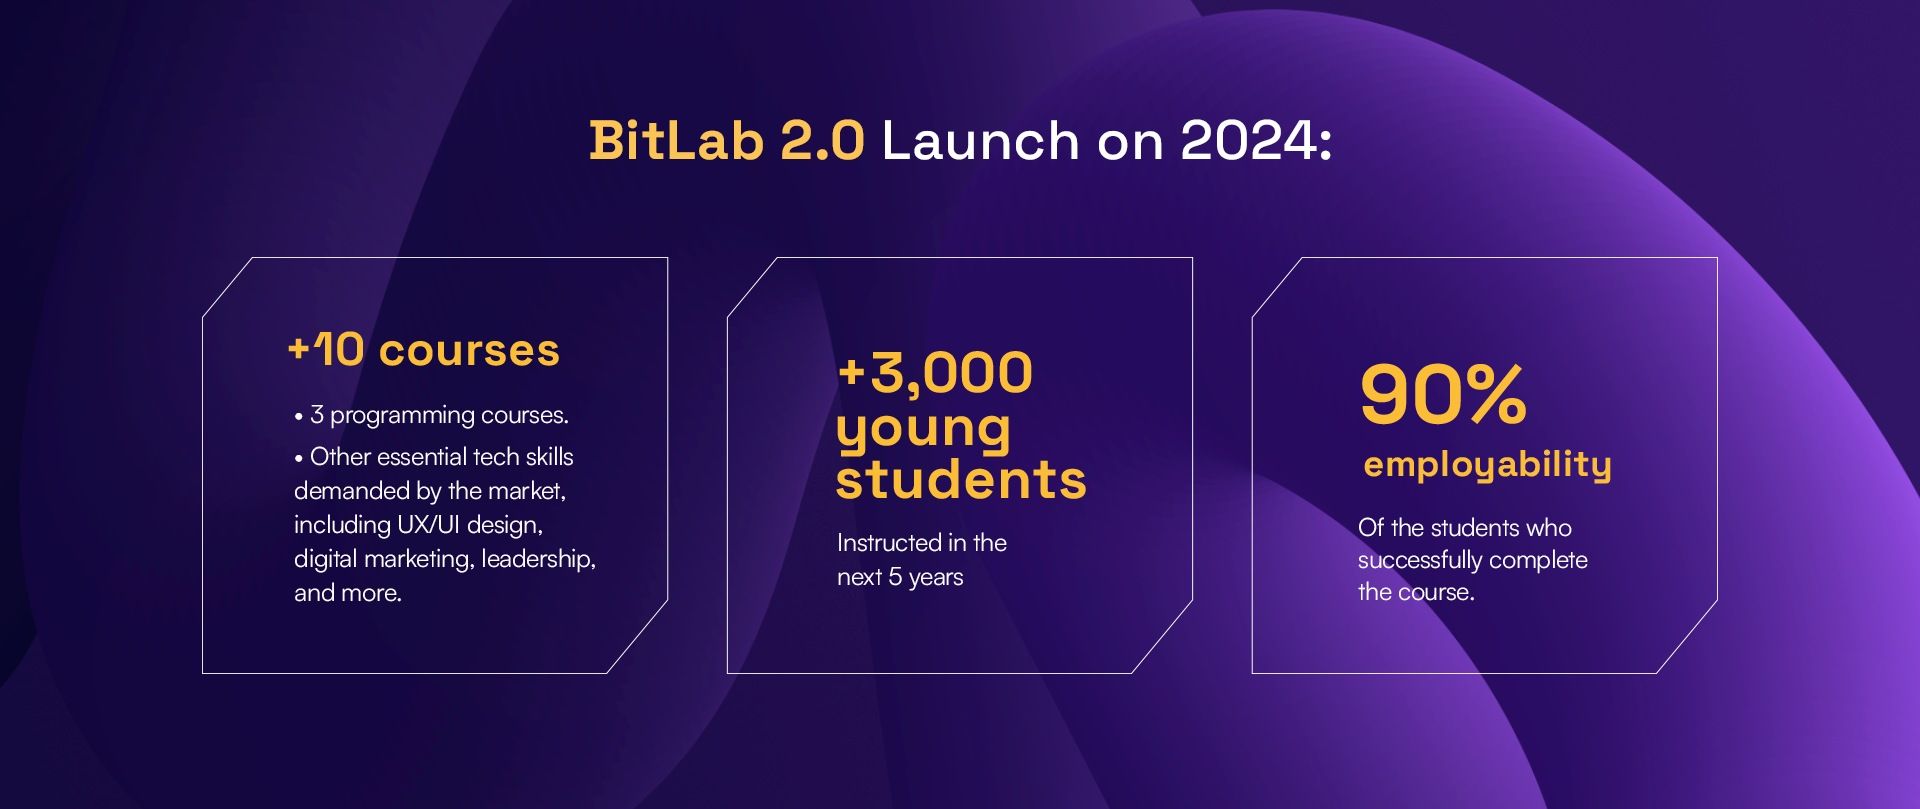 BitLab 2.0 Launch on 2024: +10 tech skill courses, +3,000 young students instructed in the next 5 years, and 90% employability of the students who successfully complete the course. 